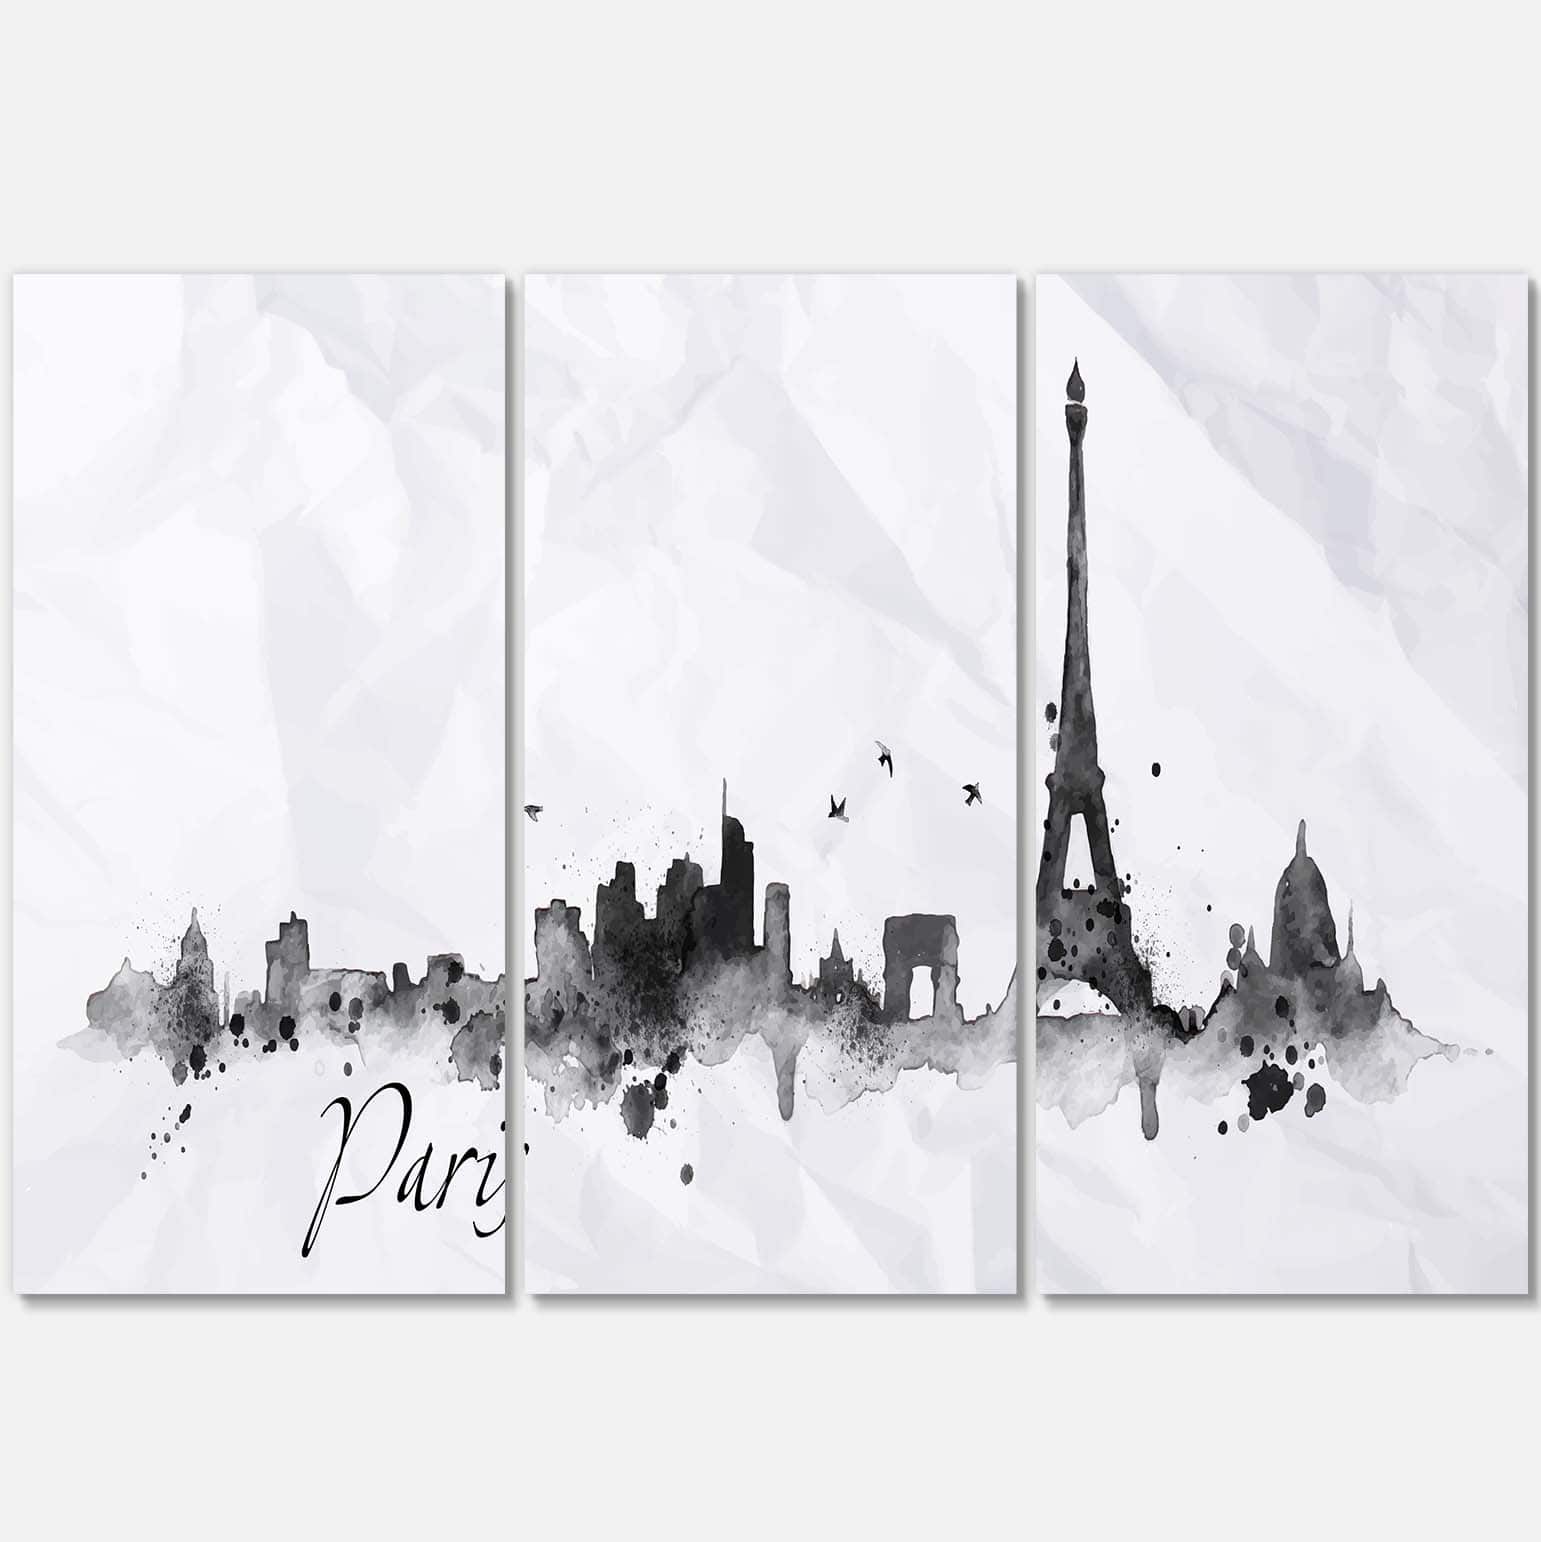 eiffel tower silhouette painting